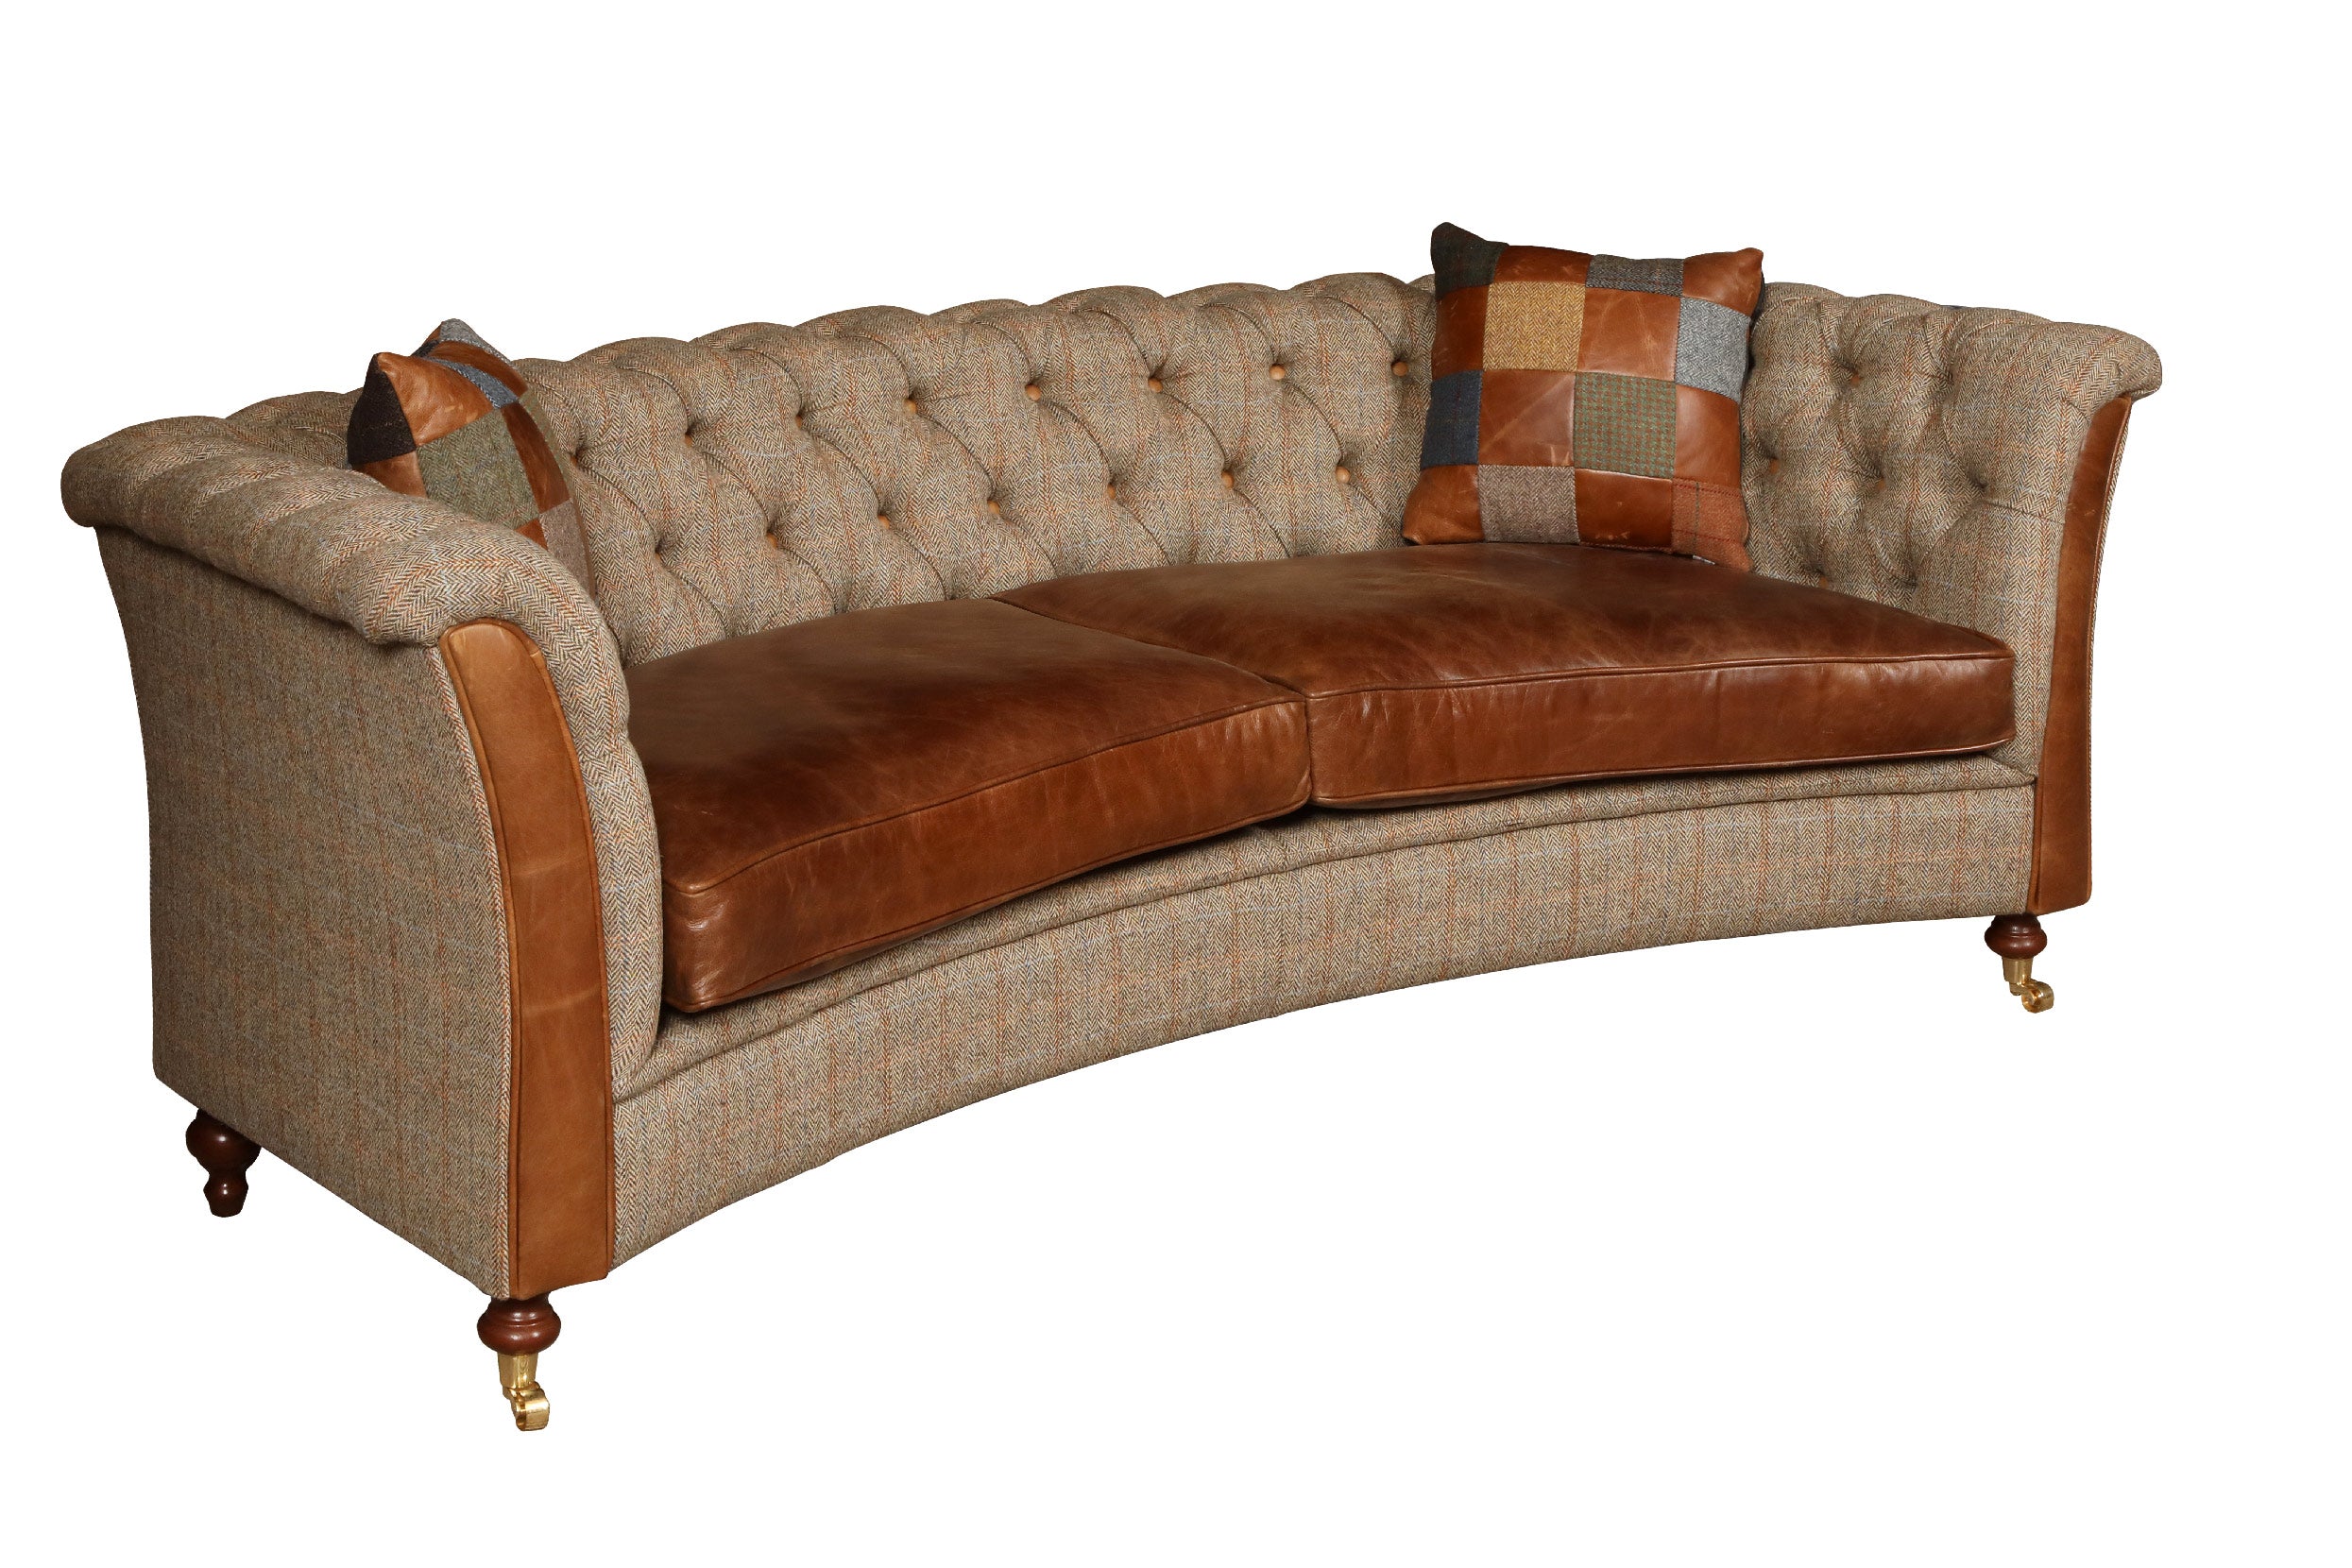 Granby Harris Tweed and Leather Curved Sofa.-harris tweed sofas-Carlton Vintage-4 Seater-Hunters Lodge-Against The Grain Furniture